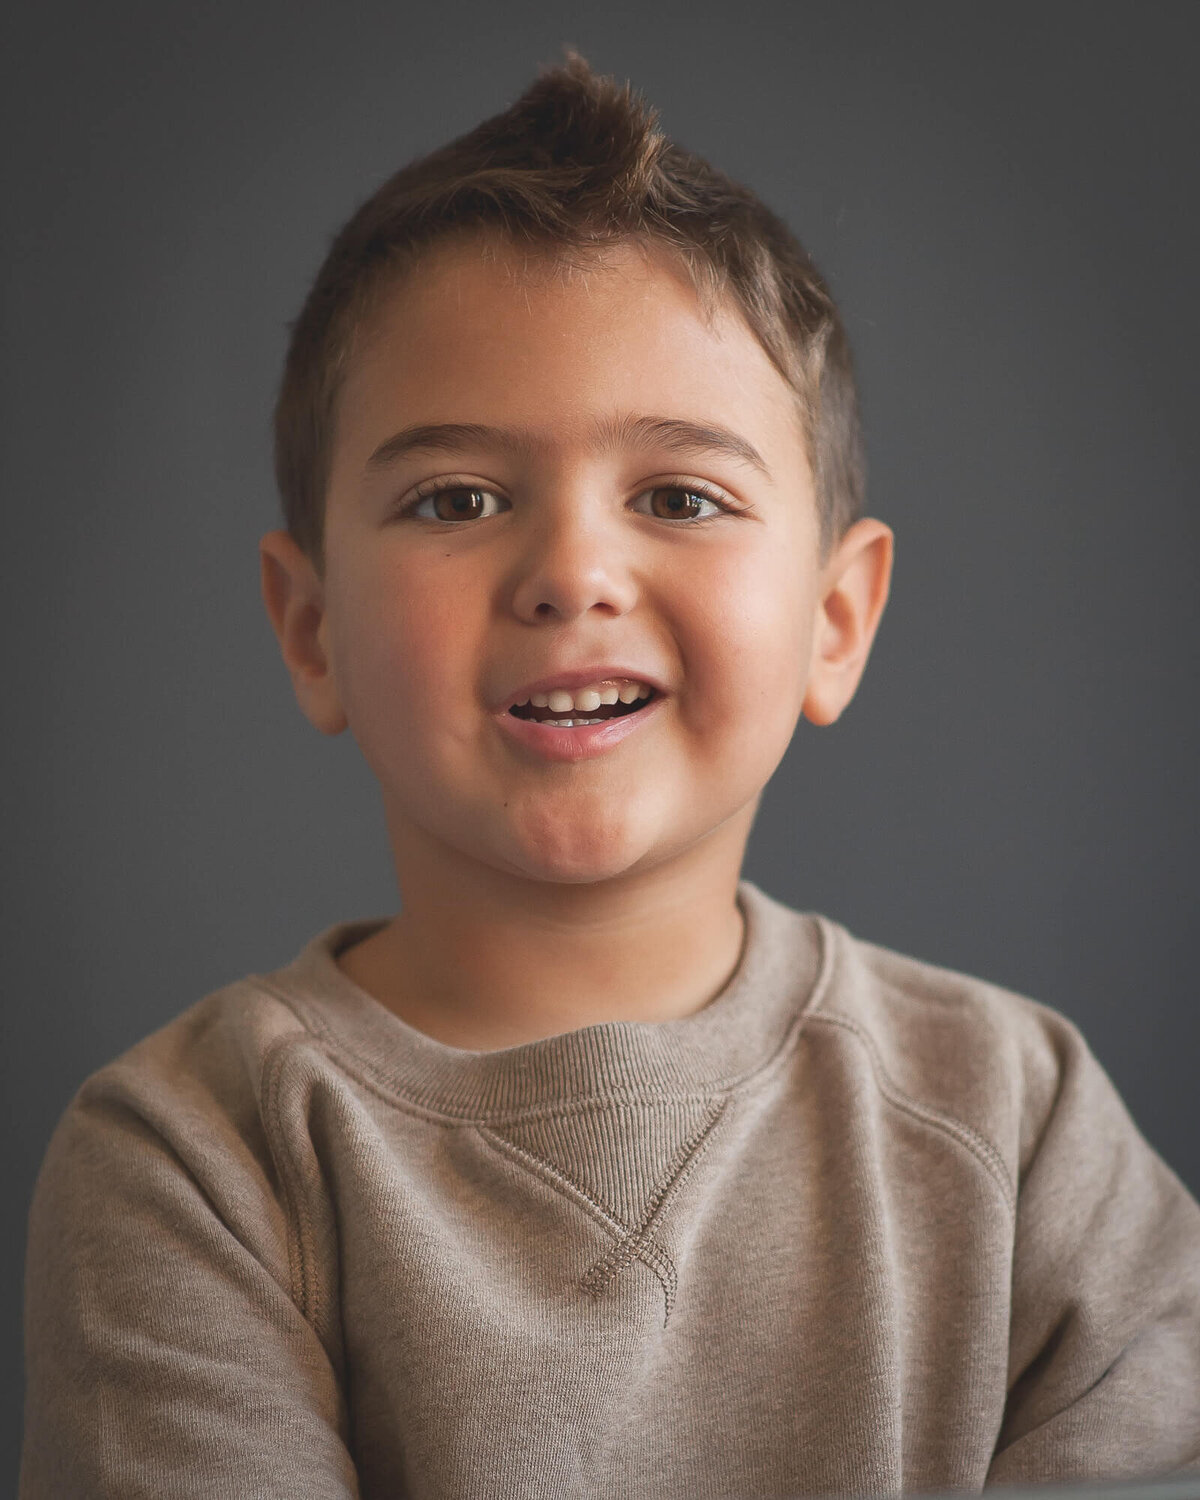 young boy wearing a brown sweatshirt making a silly face in a studio portrait with a grey background